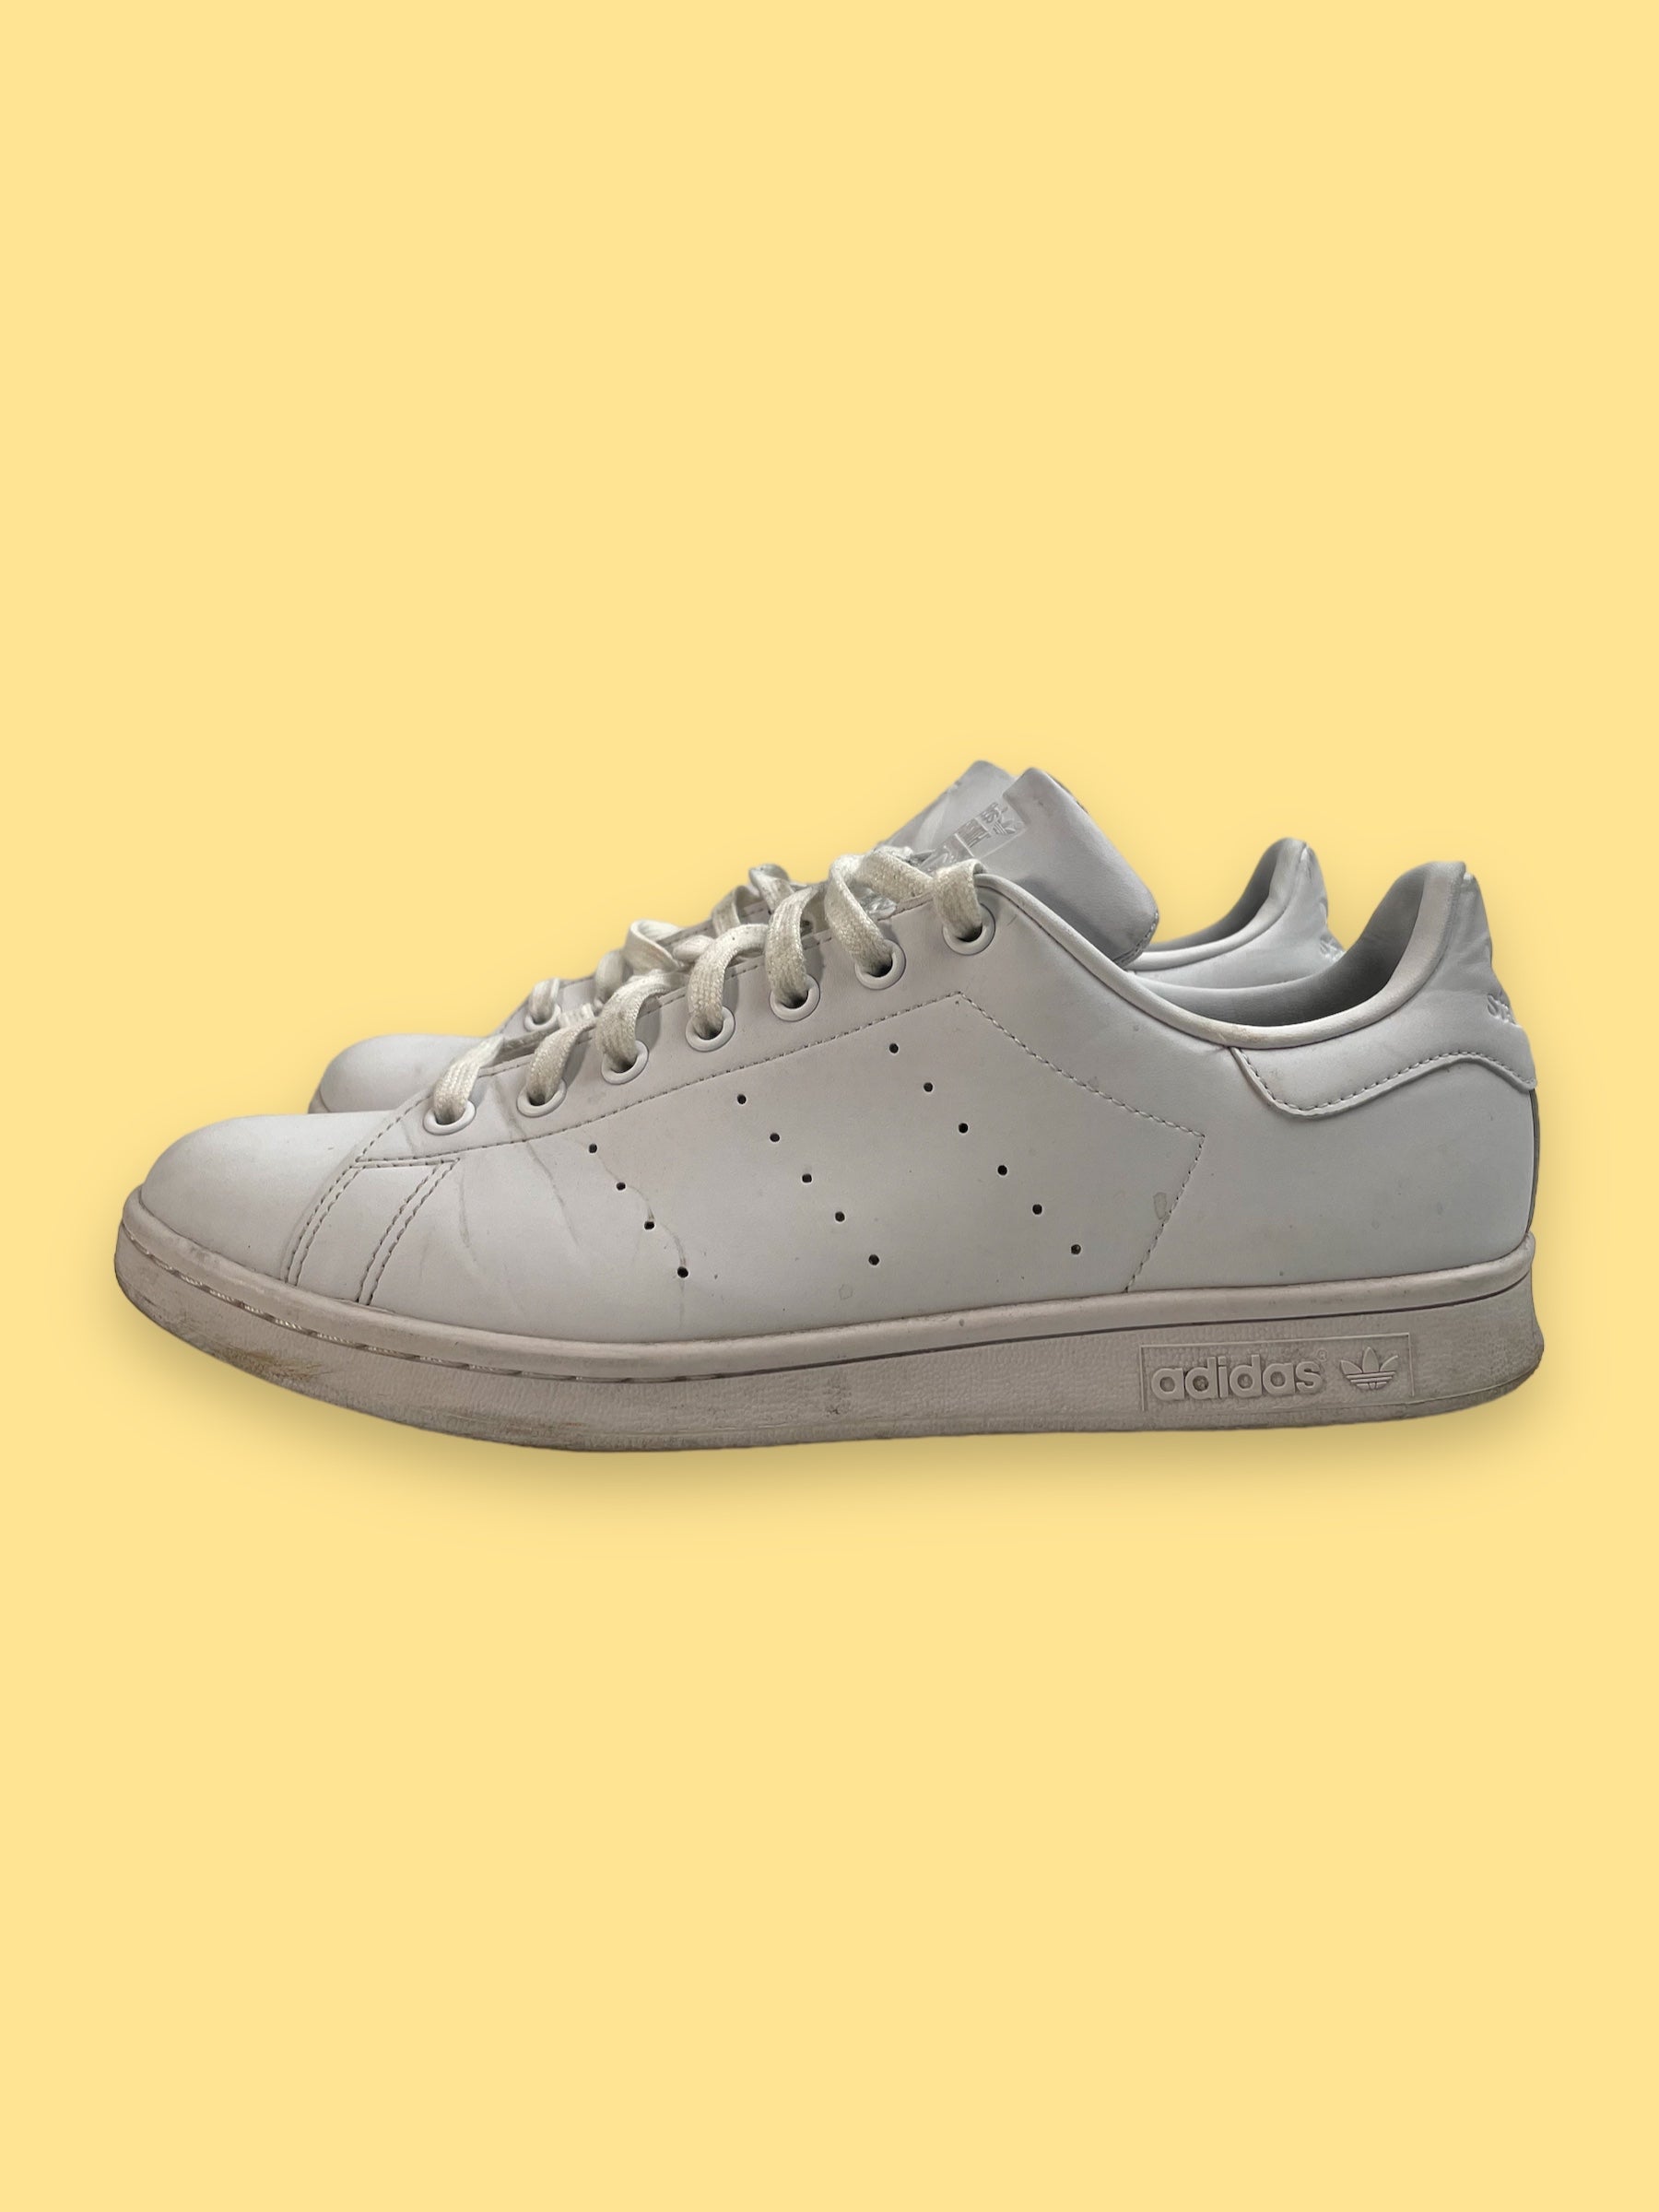 Chaussures blanches Adidas Stan Smith - Hommes taille 10